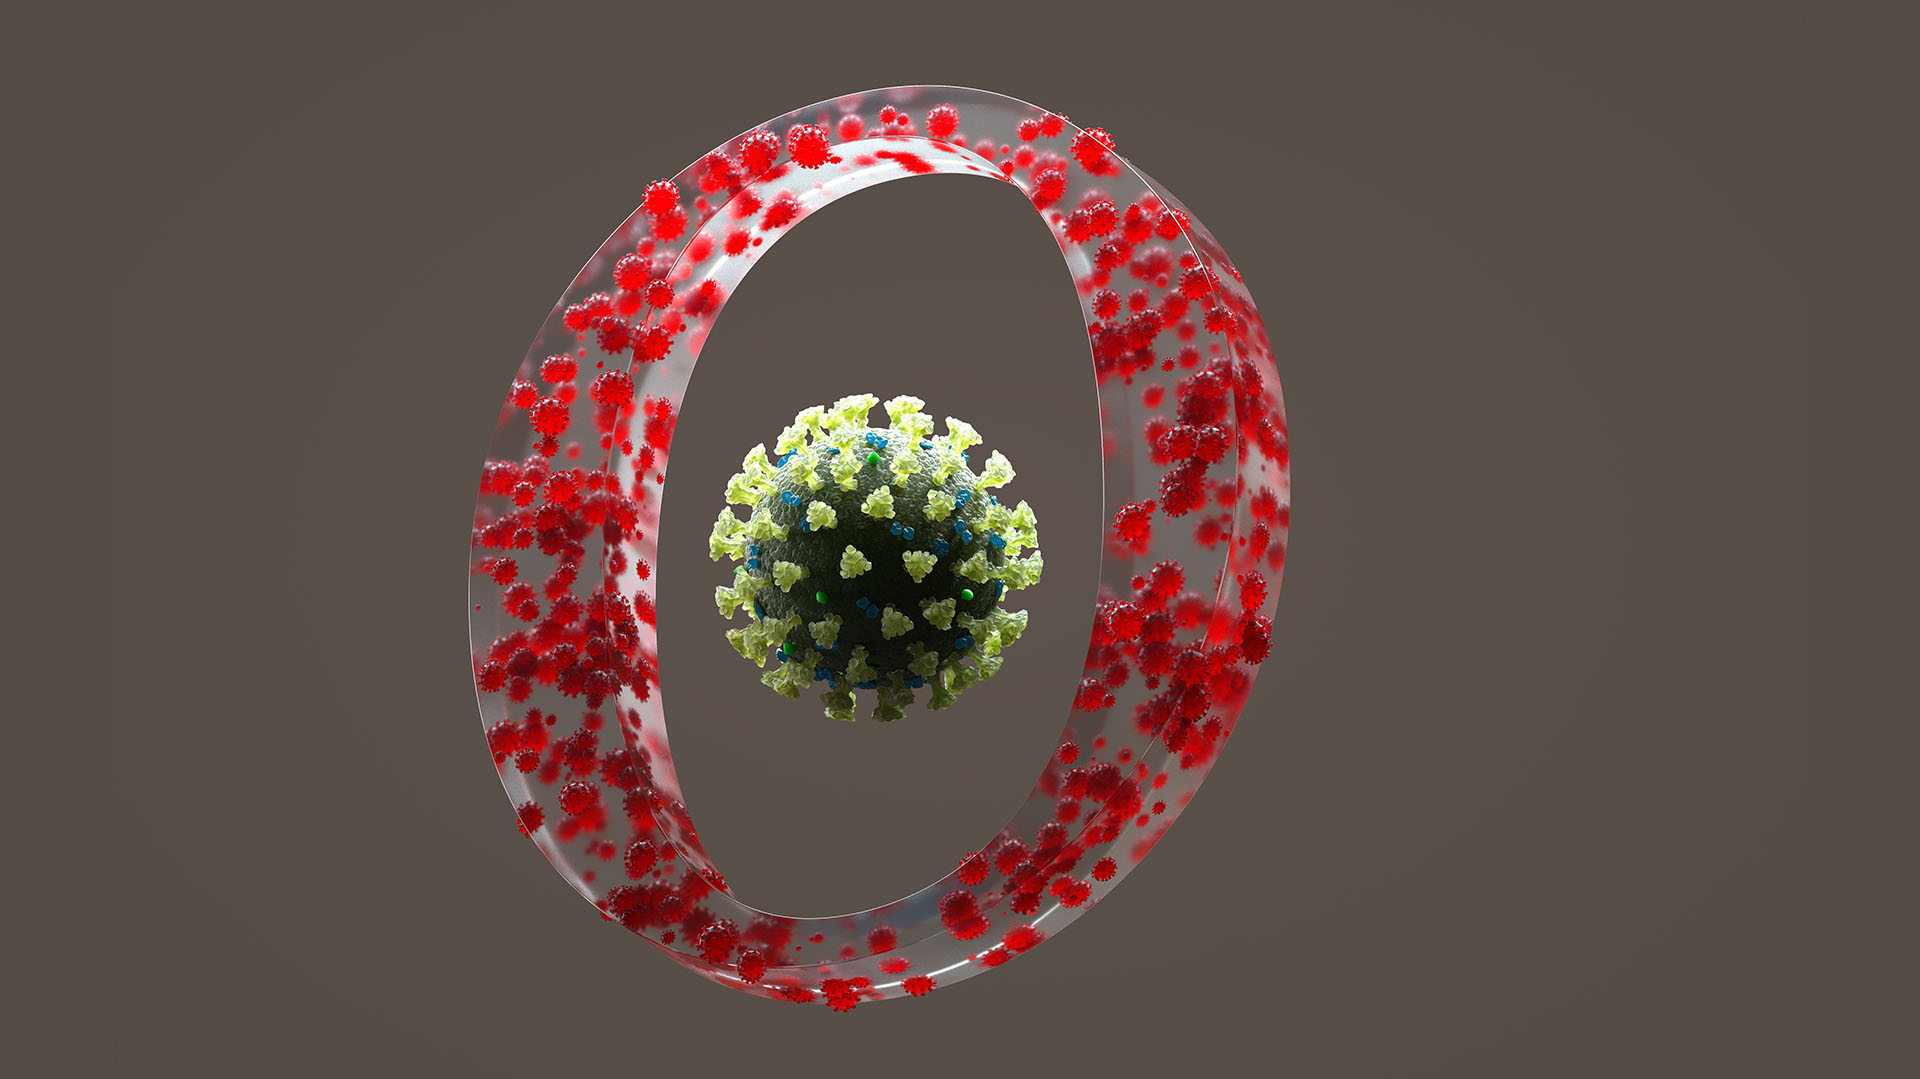 Digital generated image of COVID-19 cells organised into circular shape and made OMICRON sign with one big mutated virus cell on the middle against beige background.